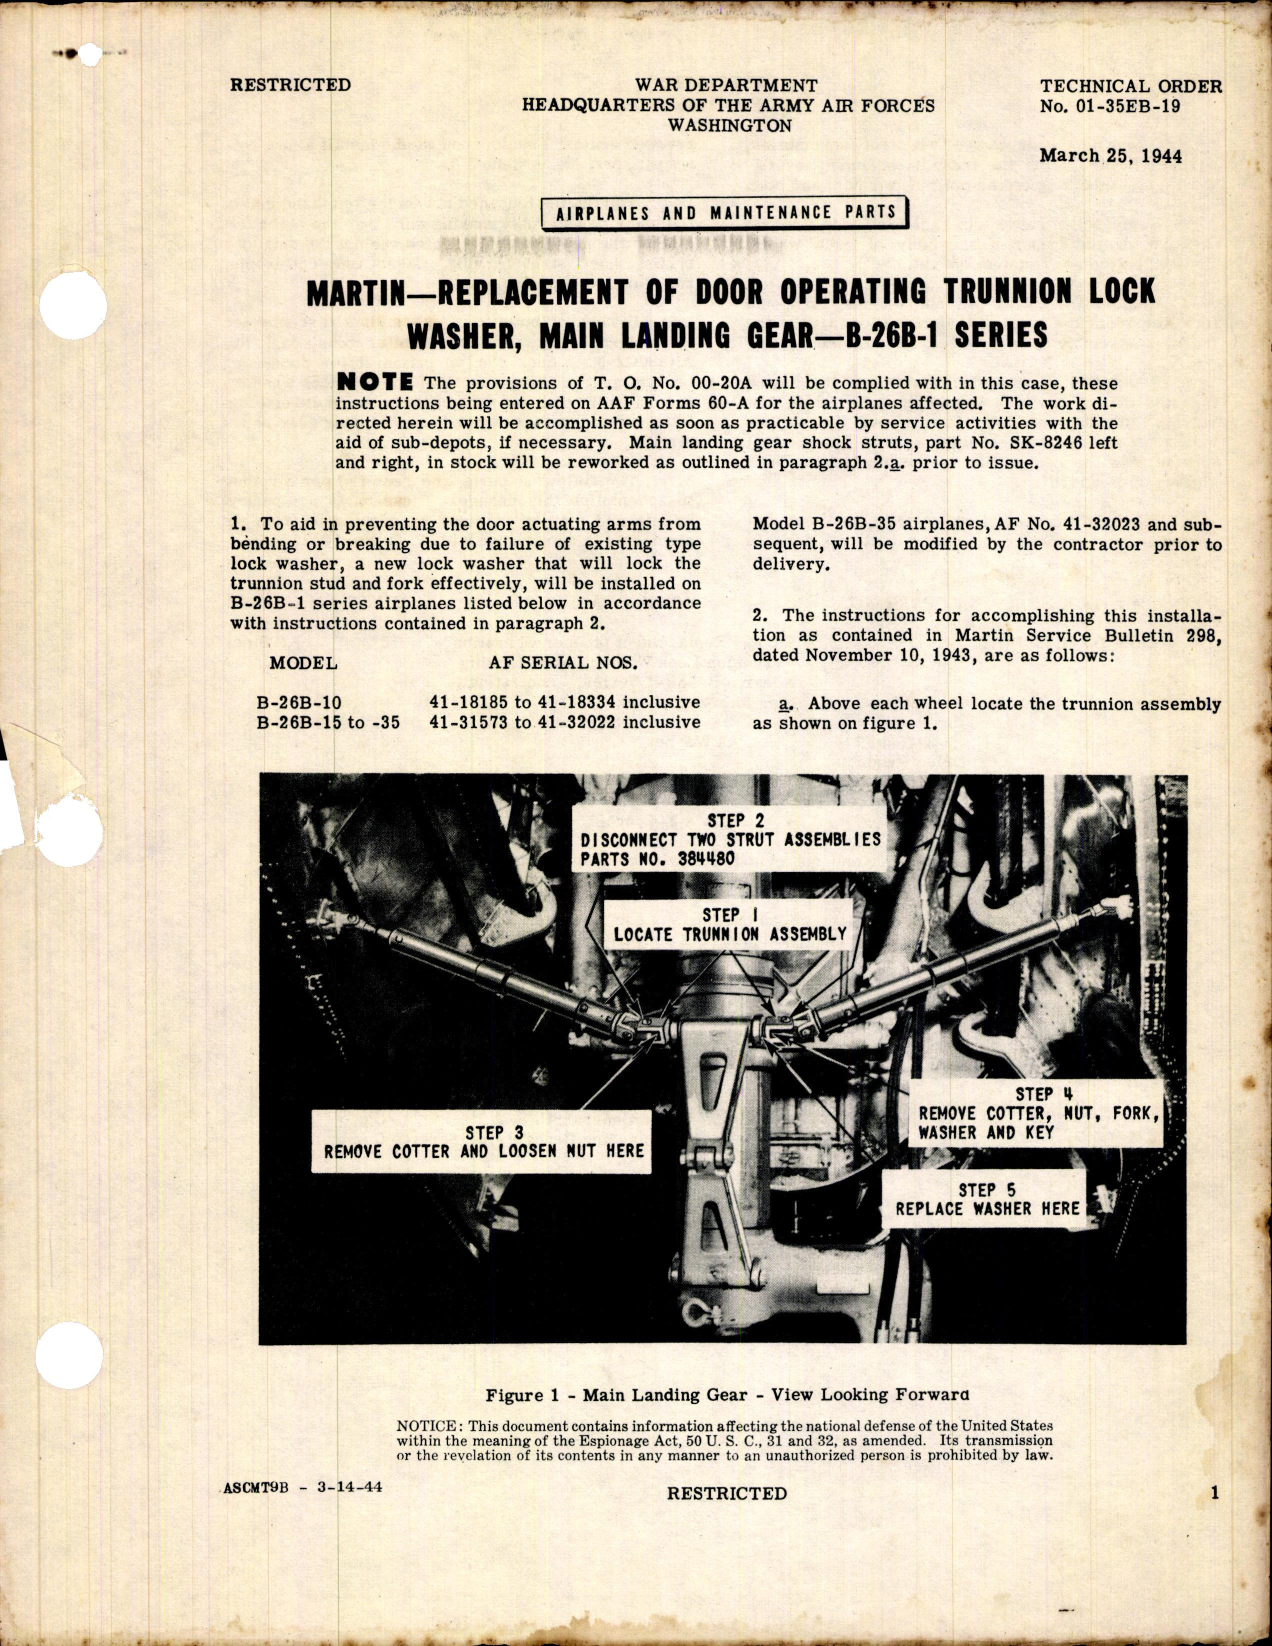 Sample page 1 from AirCorps Library document: Replacement of Door Operating Trunnion Lock Washer, Main Landing Gear for B-26B-1 Series